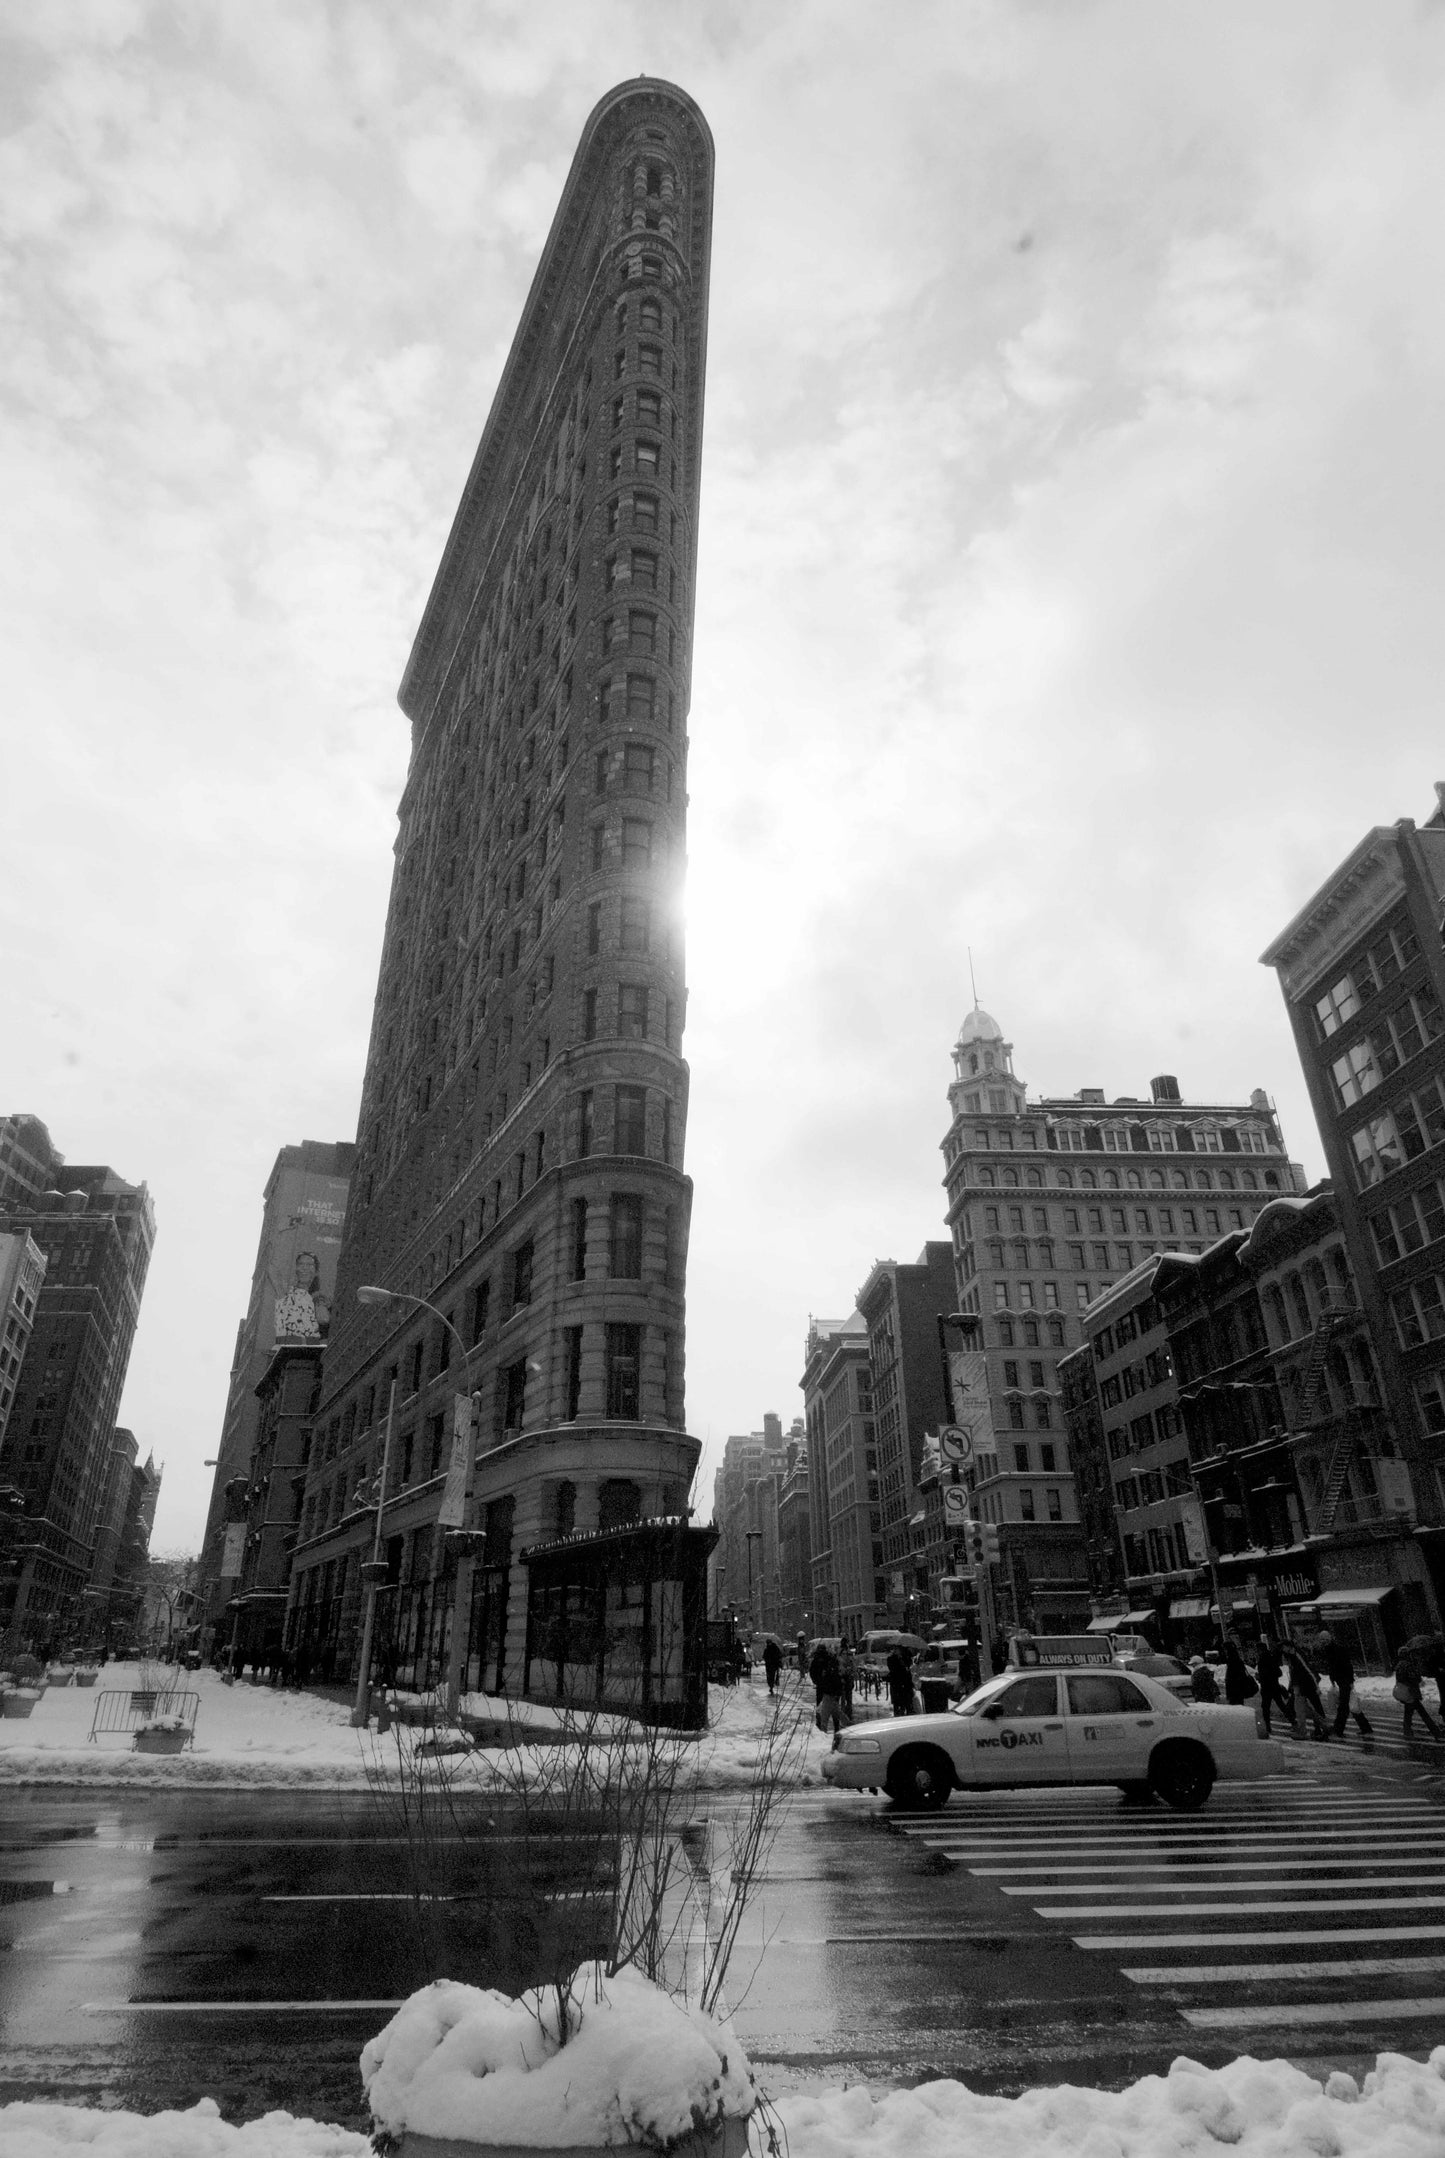 Alessandra Mattanza | LIGHT, Flatiron Building, New York. The iconic Flatiron building stands in the winter sunshine. Available as a print on acrylic glass.